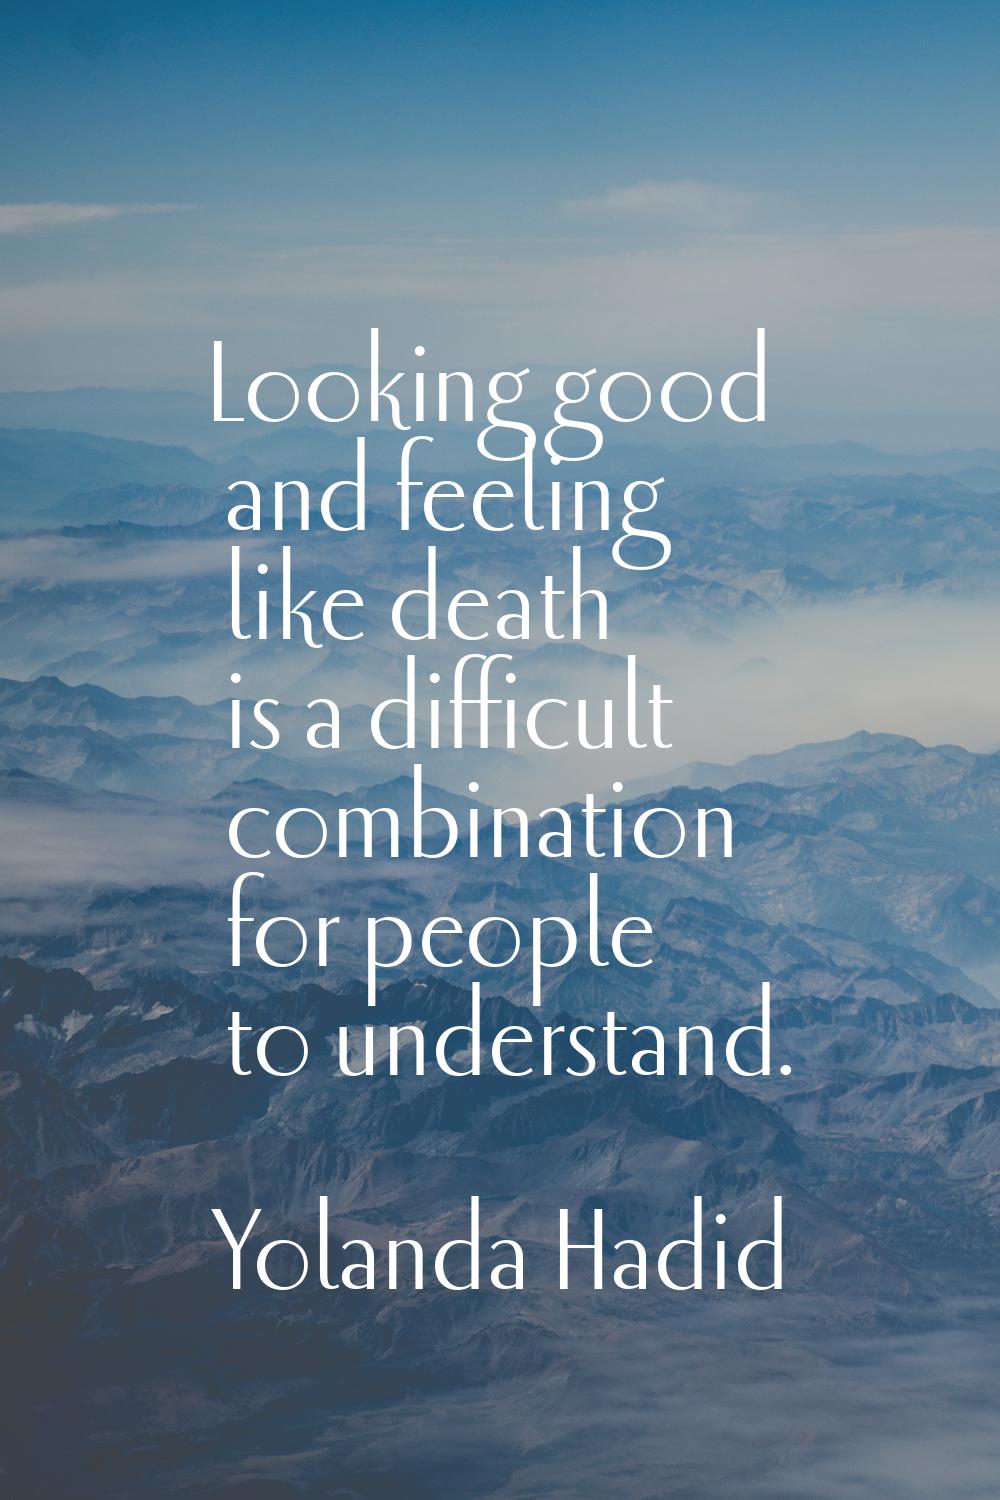 Looking good and feeling like death is a difficult combination for people to understand.